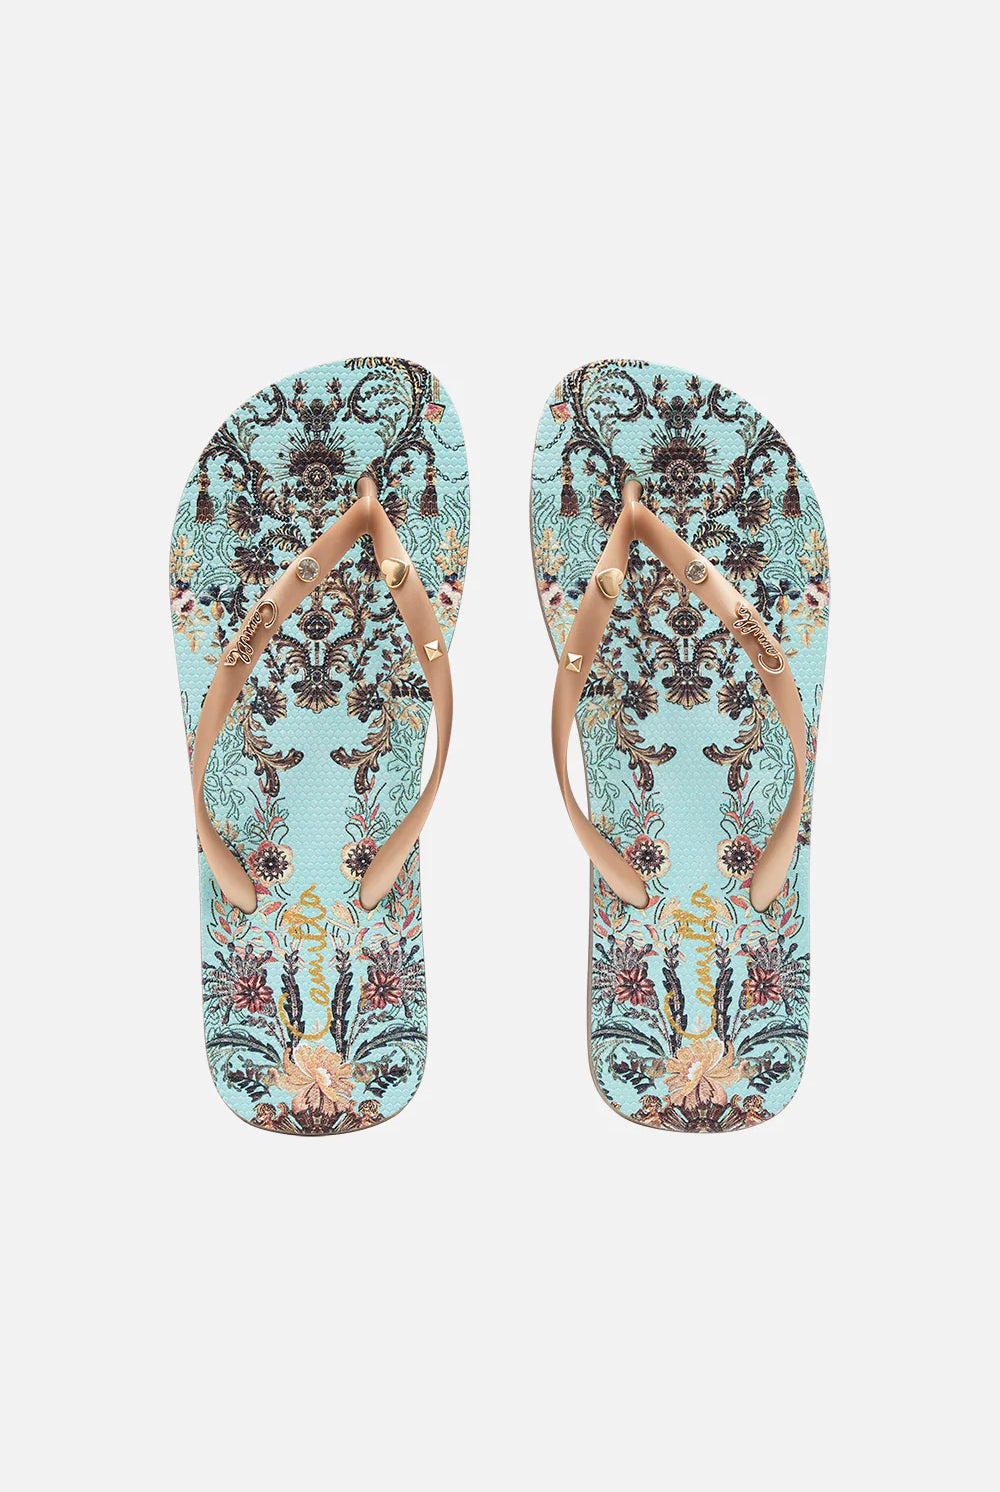 CAMILLA Jandals - Adieu Yesterday PRE ORDER - CAMILLA - [product type] - Magpie Style